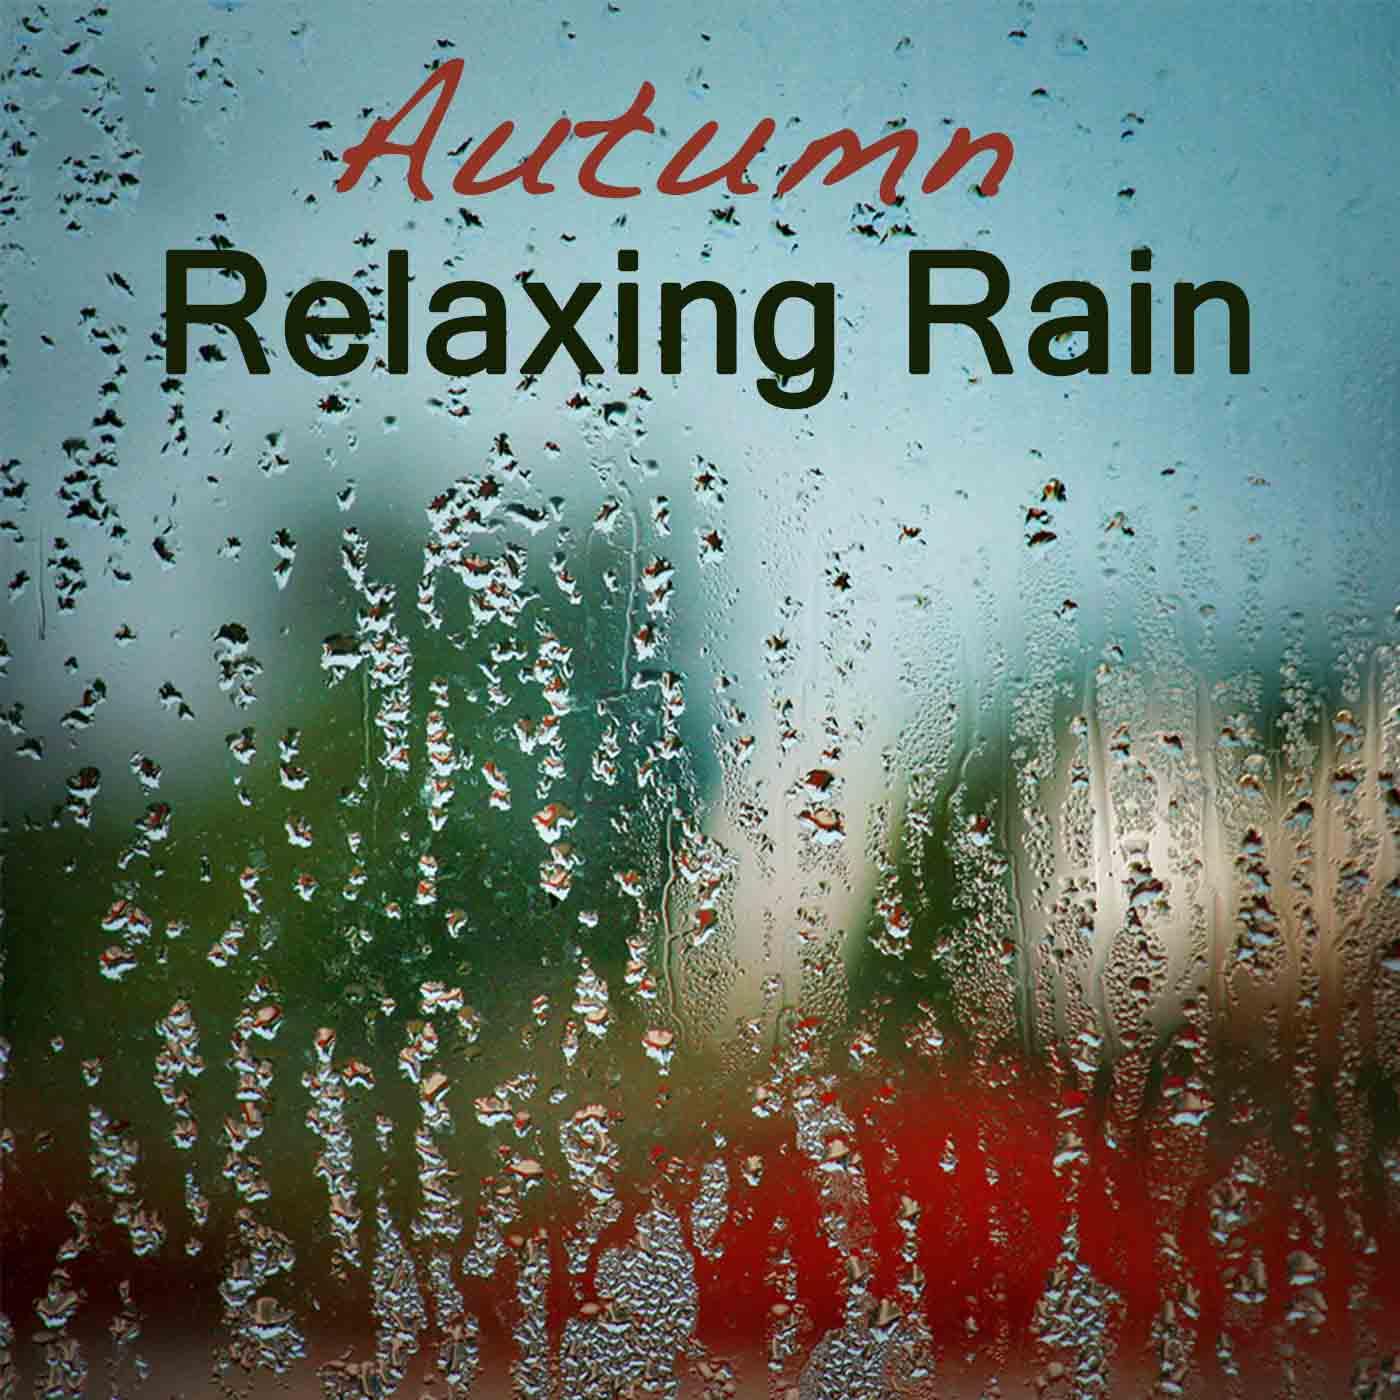 Autumn Relaxing Rain Sound: Relaxing Sounds of Rain, Relaxation Nature Music Background, Soothing Sounds, Romantic Rain Music & Soft Piano Songs